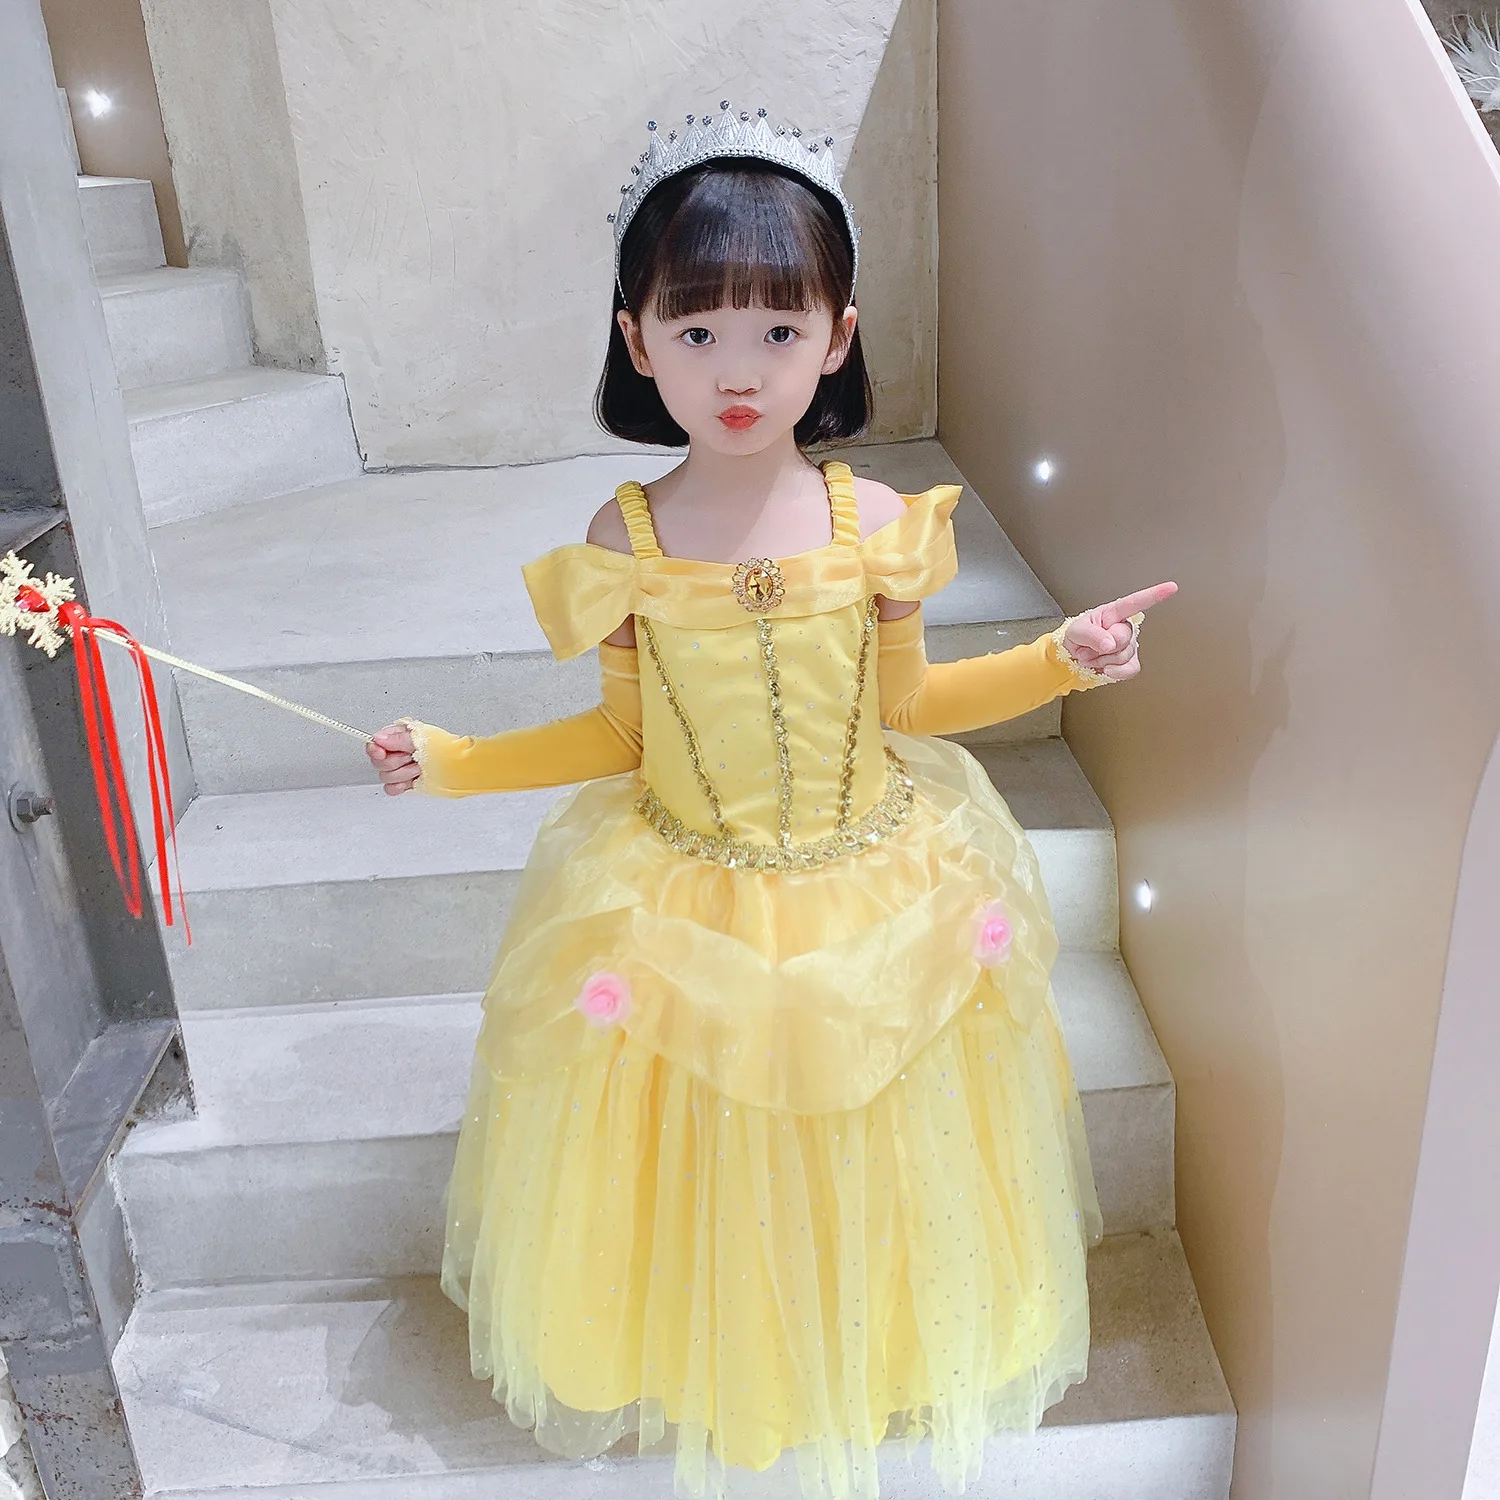 NEW Anime Beauty And The Beast Belle Princess Dress Cosplay Costume Dinner  Dress Halloween Party Dress Accept Customized From Stansford, $101.52 |  DHgate.Com